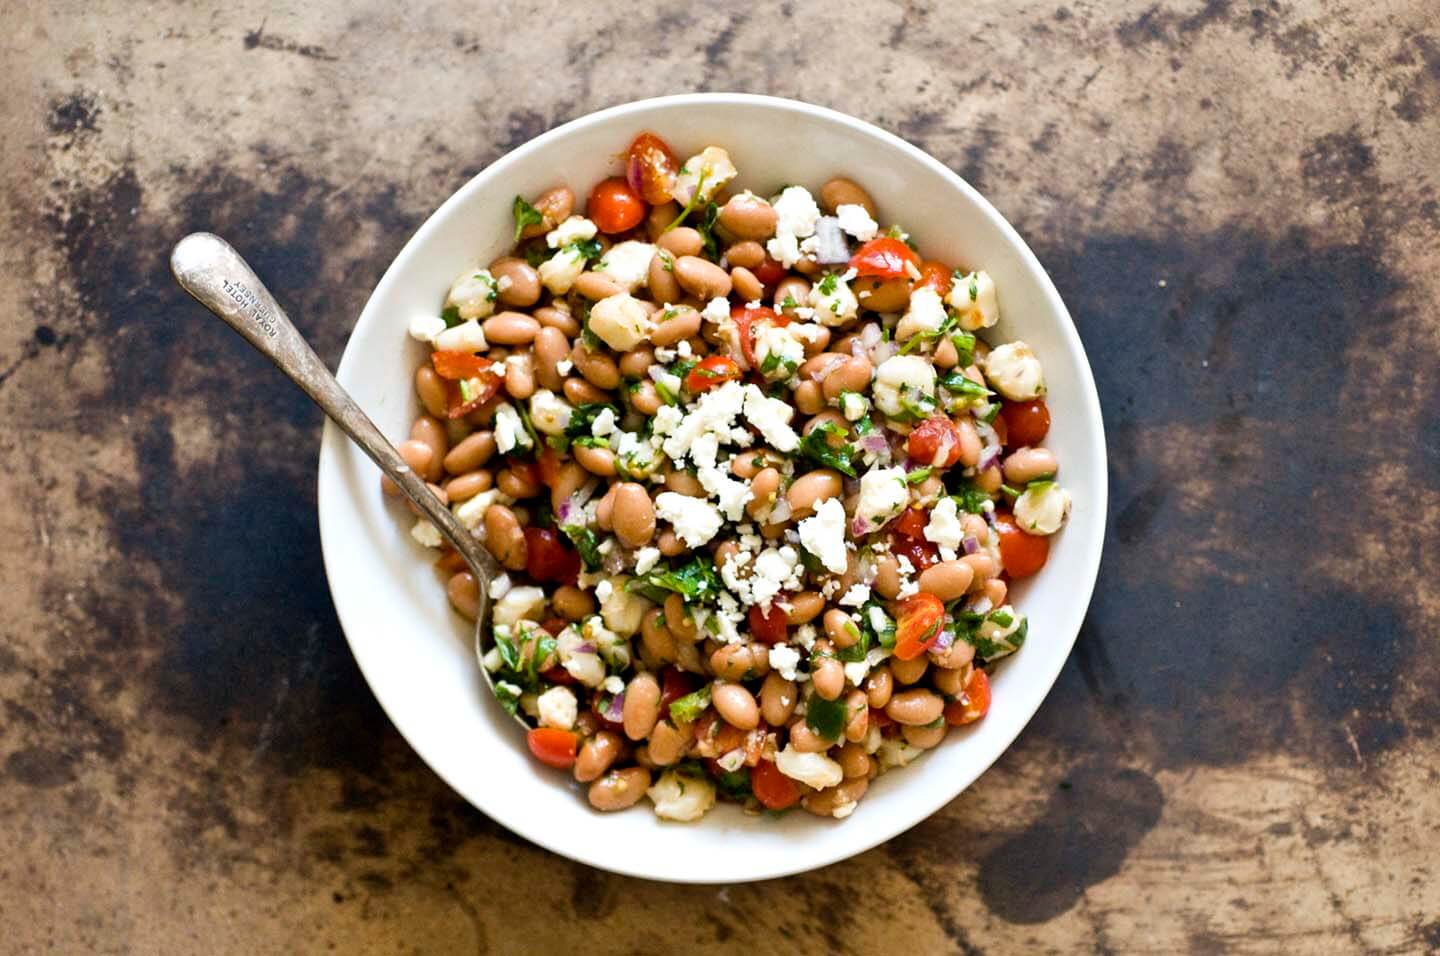 Pinto bean and hominy salad DSC8970